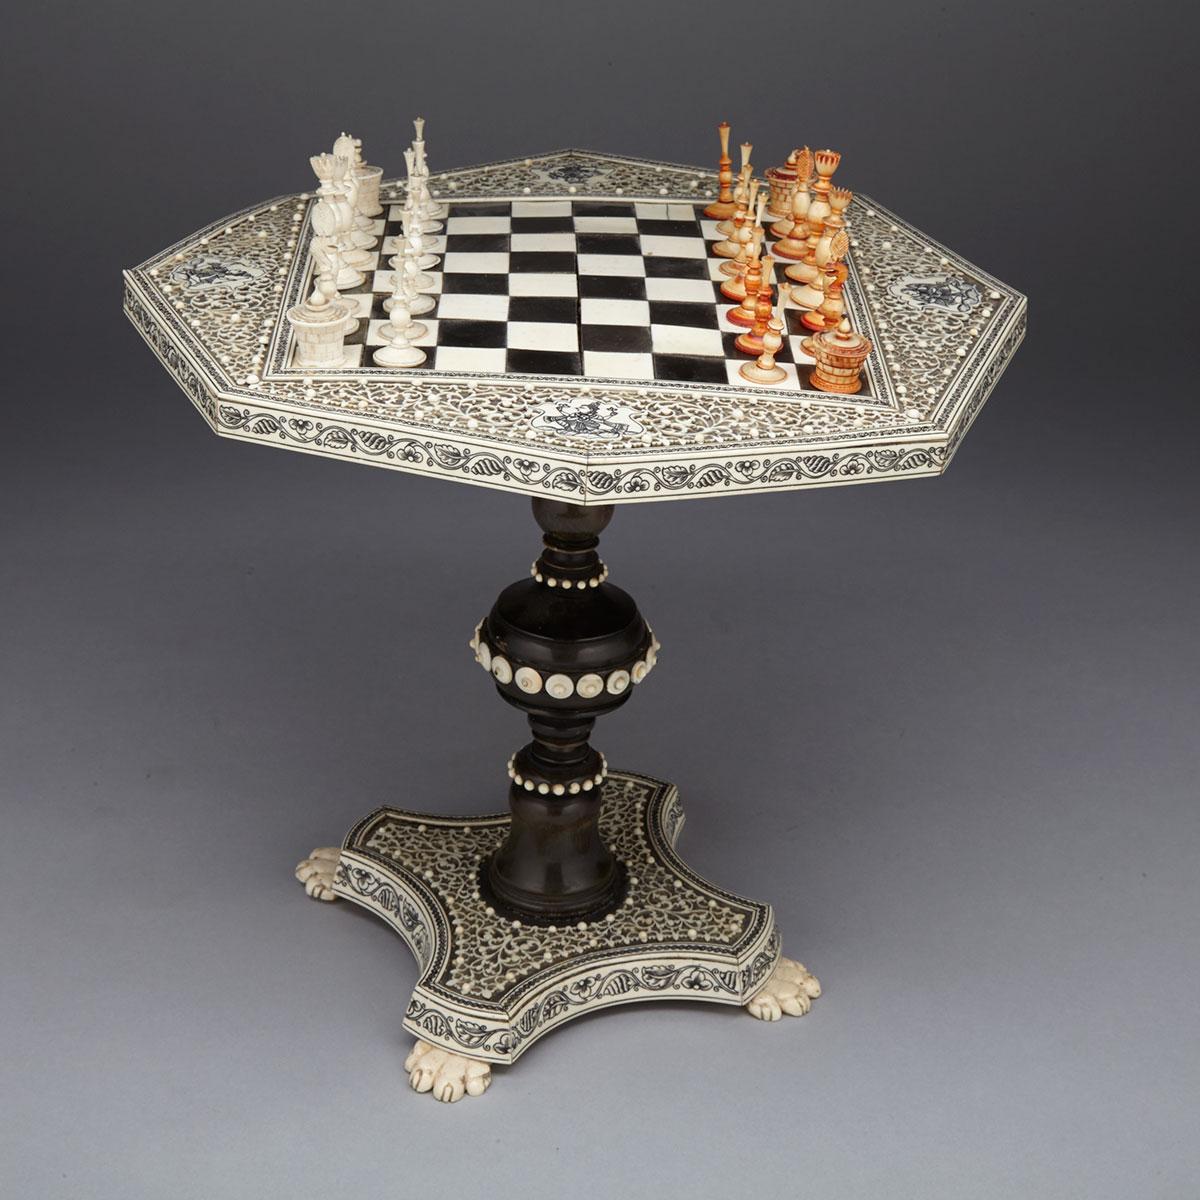 Anglo Indian Miniature Ivory and Horn Game Table and Chess Set, Vizagapatam, c.1840